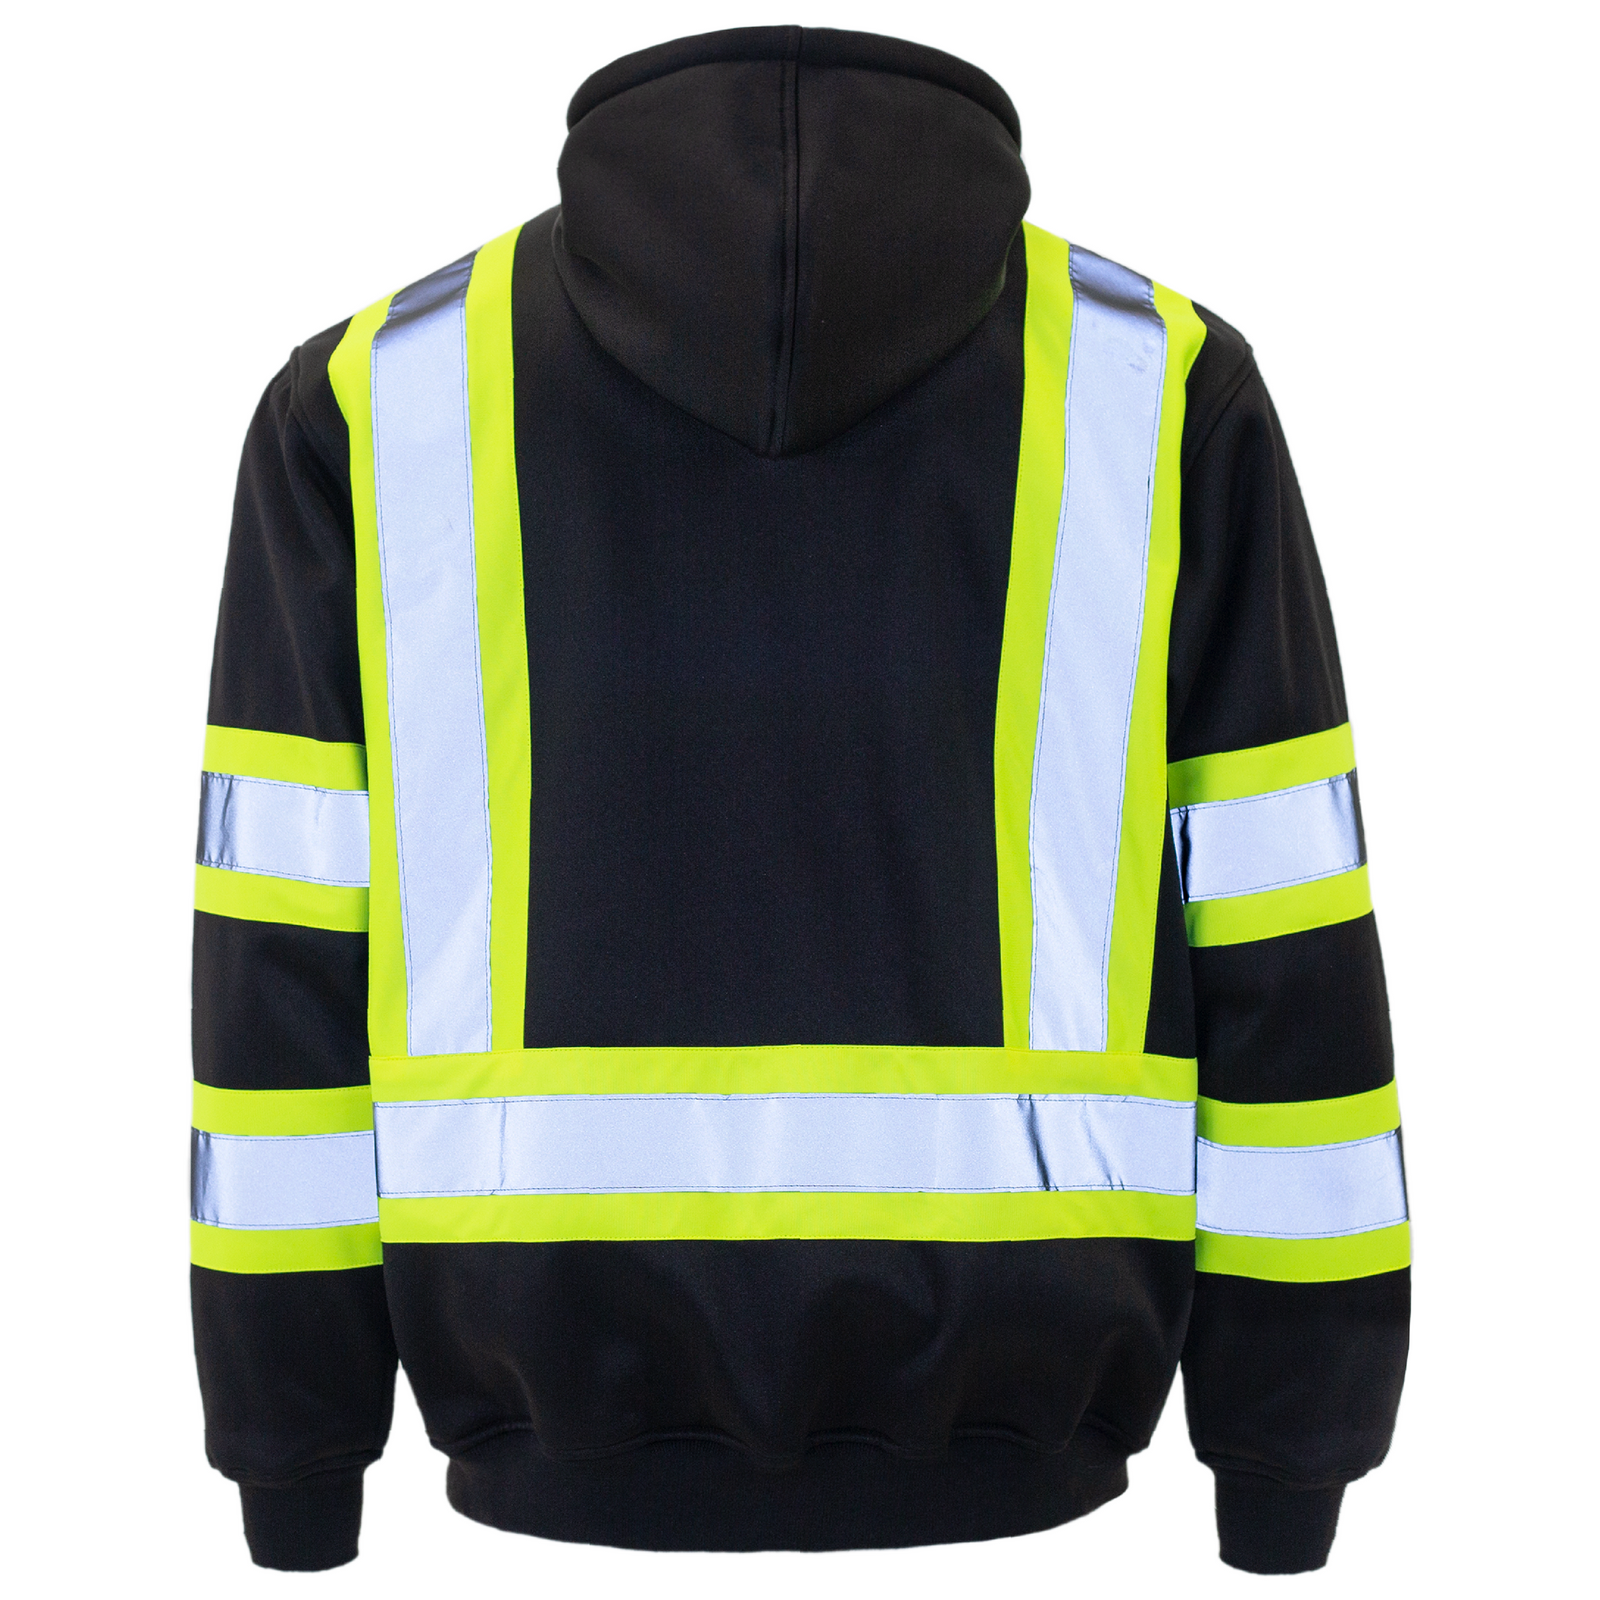 JORESTECH black hi-vis safety hooded black and yellow sweatshirt with reflective stripes